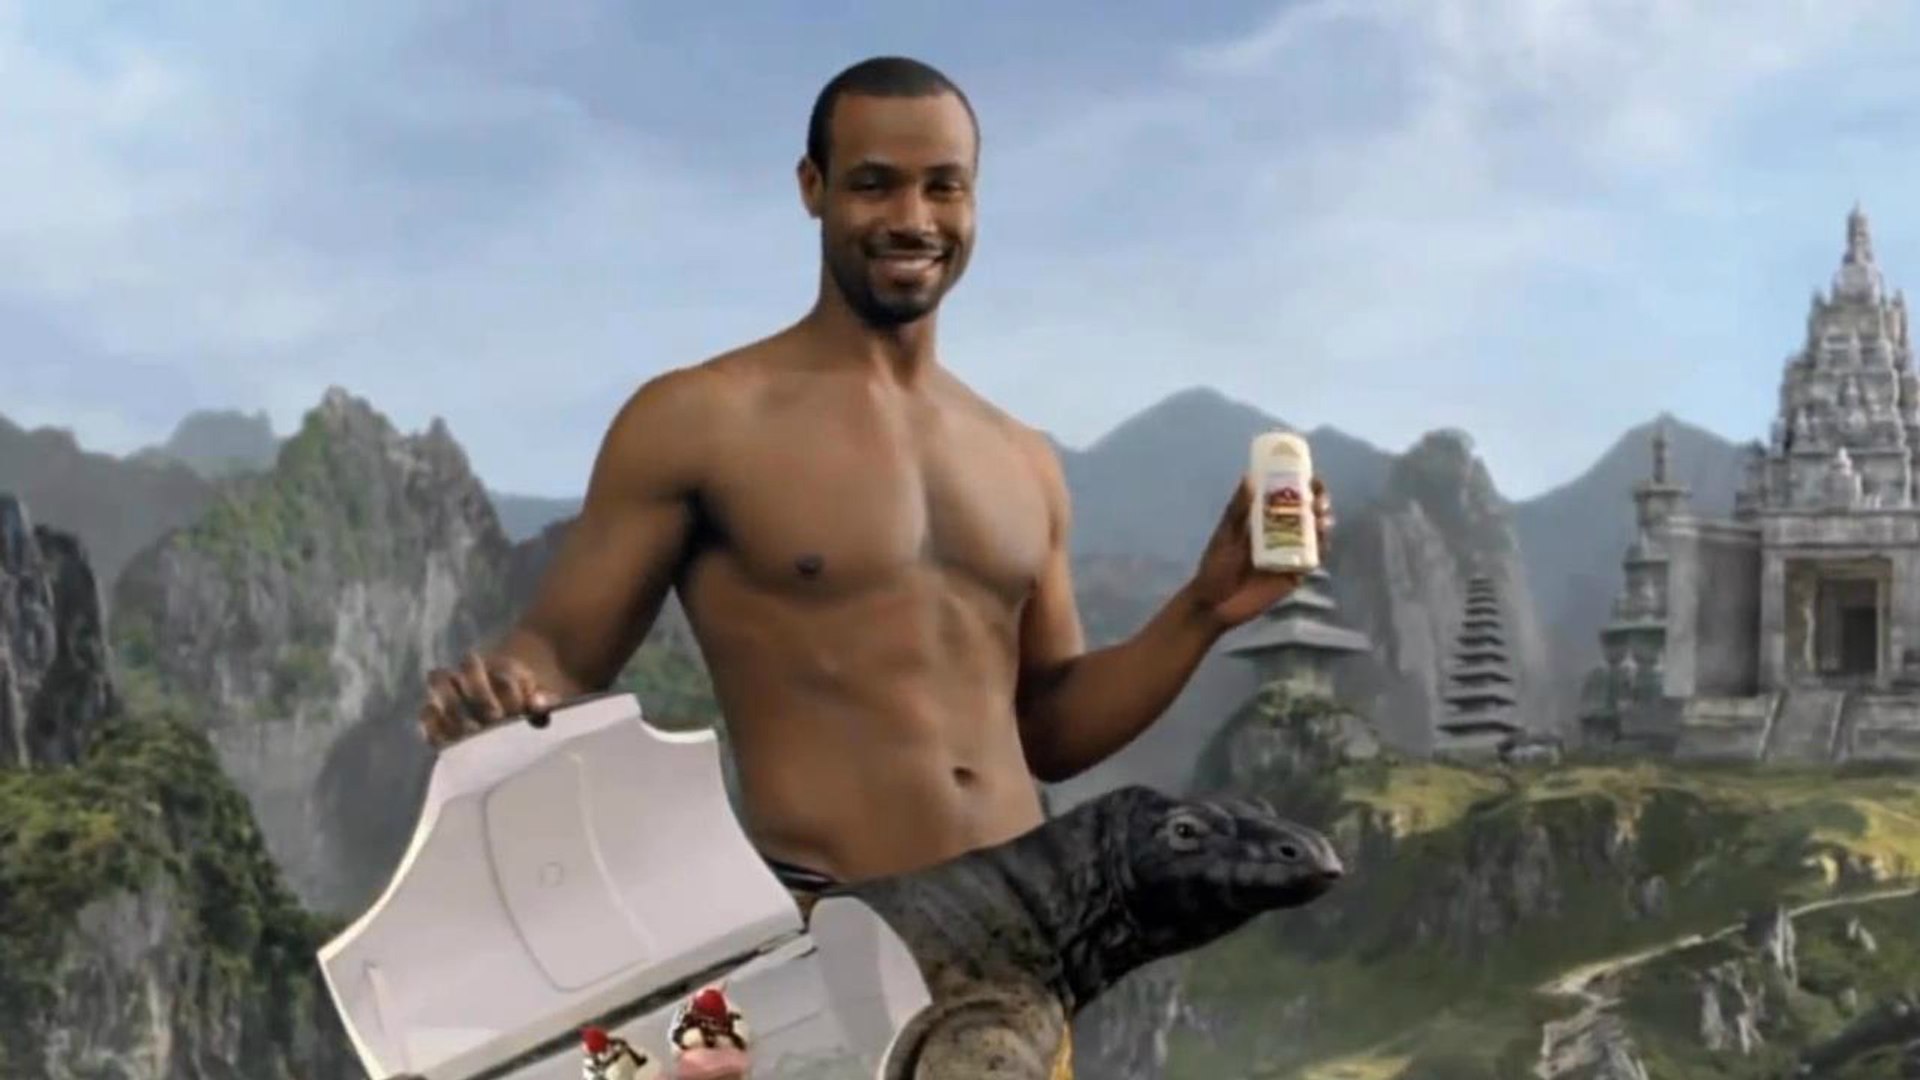 funny old spice ads